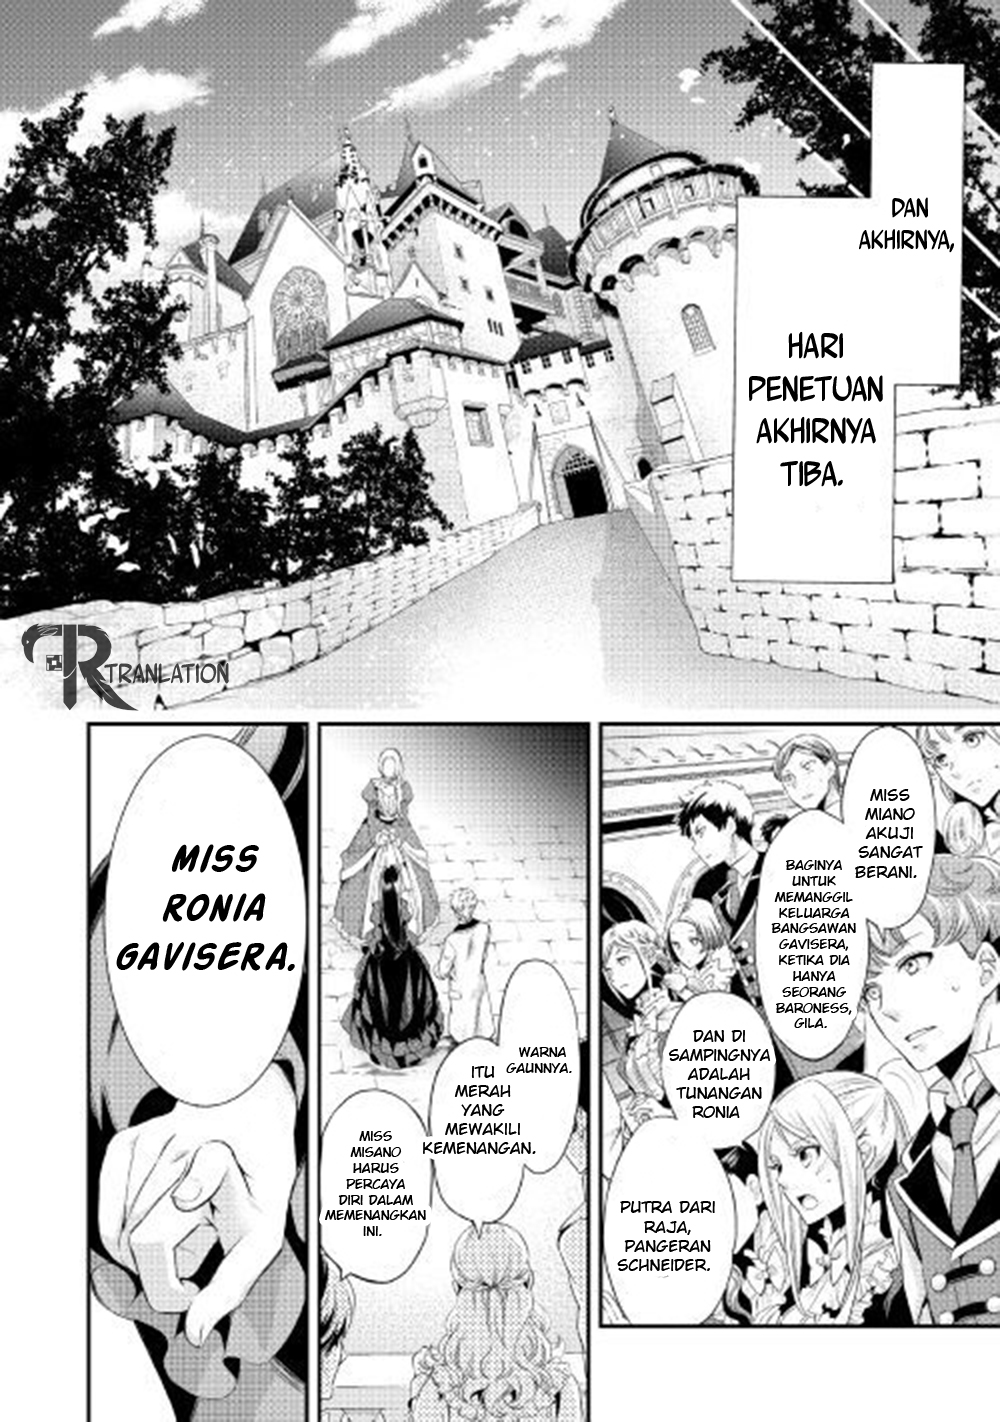 Milady Just Wants to Relax Chapter 01 9